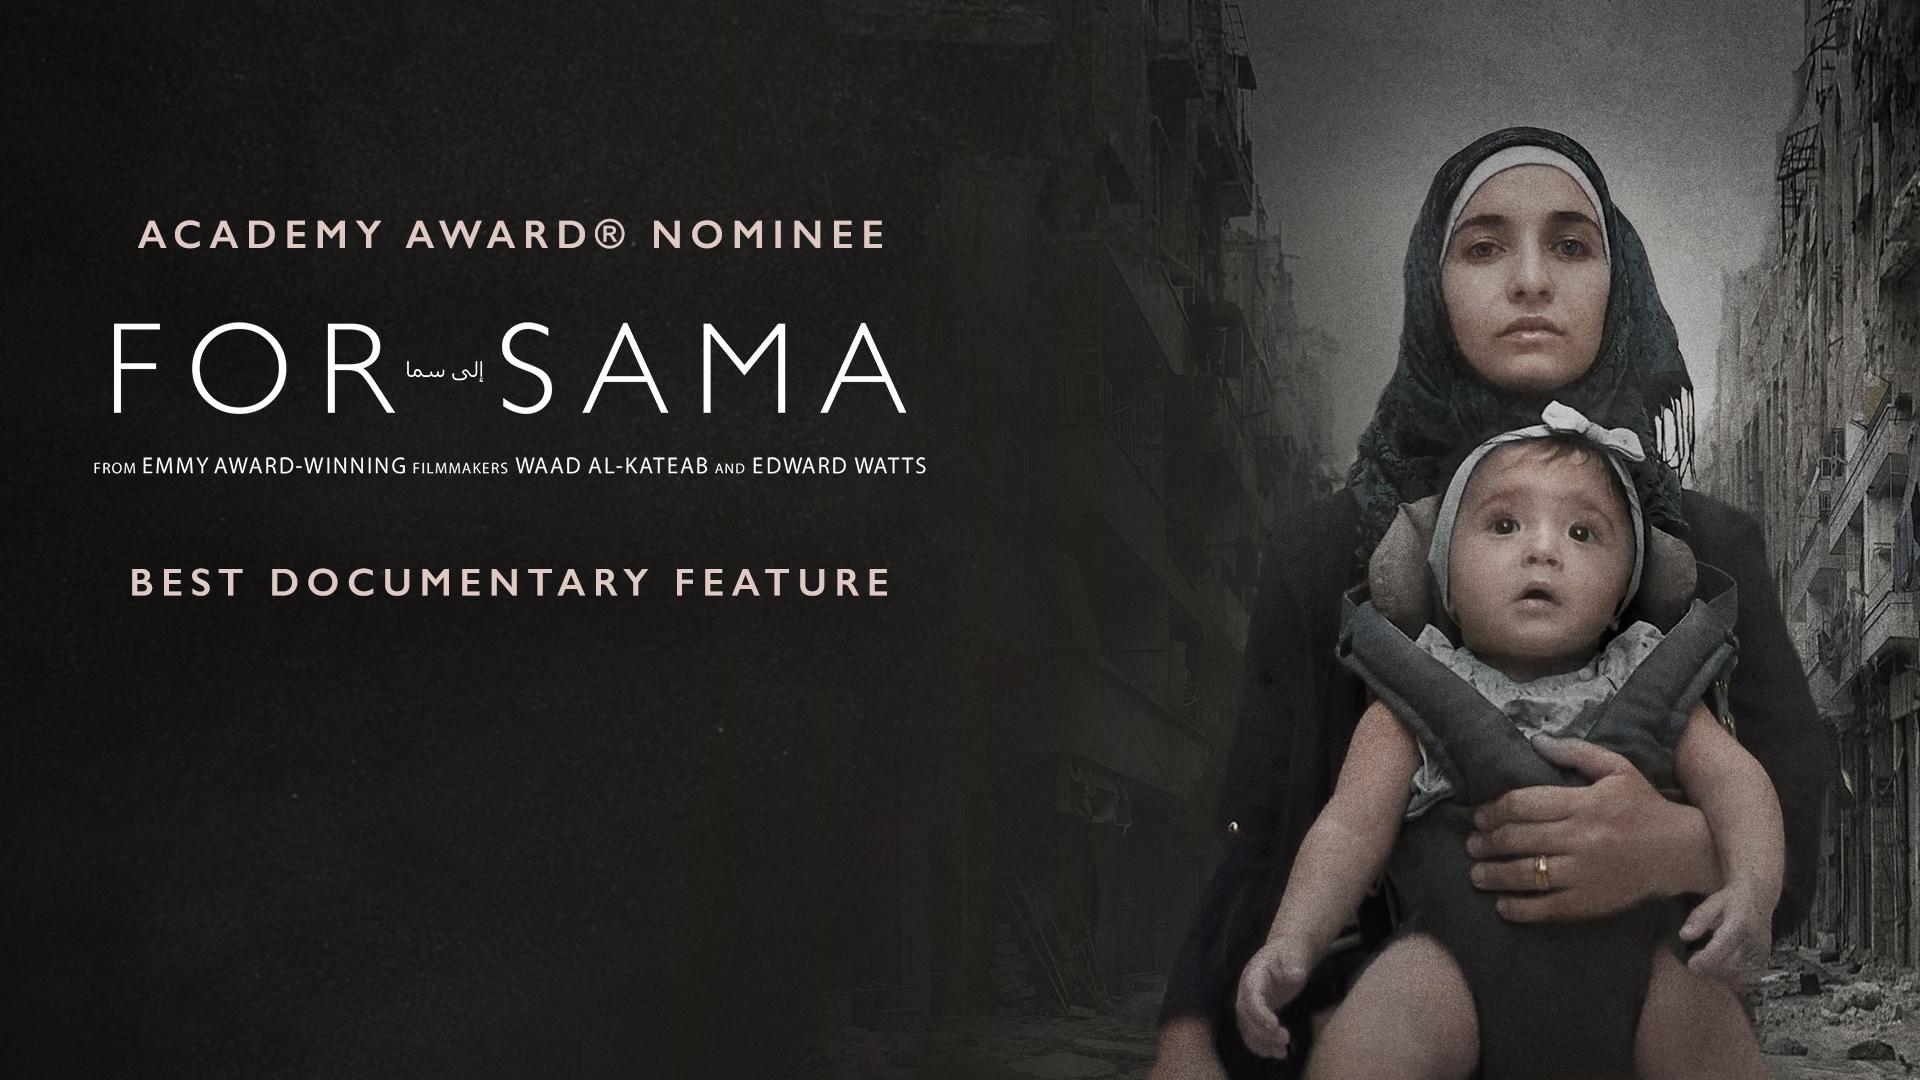 Stream the Academy Award-nominated film from FRONTLINE on pbs.org.